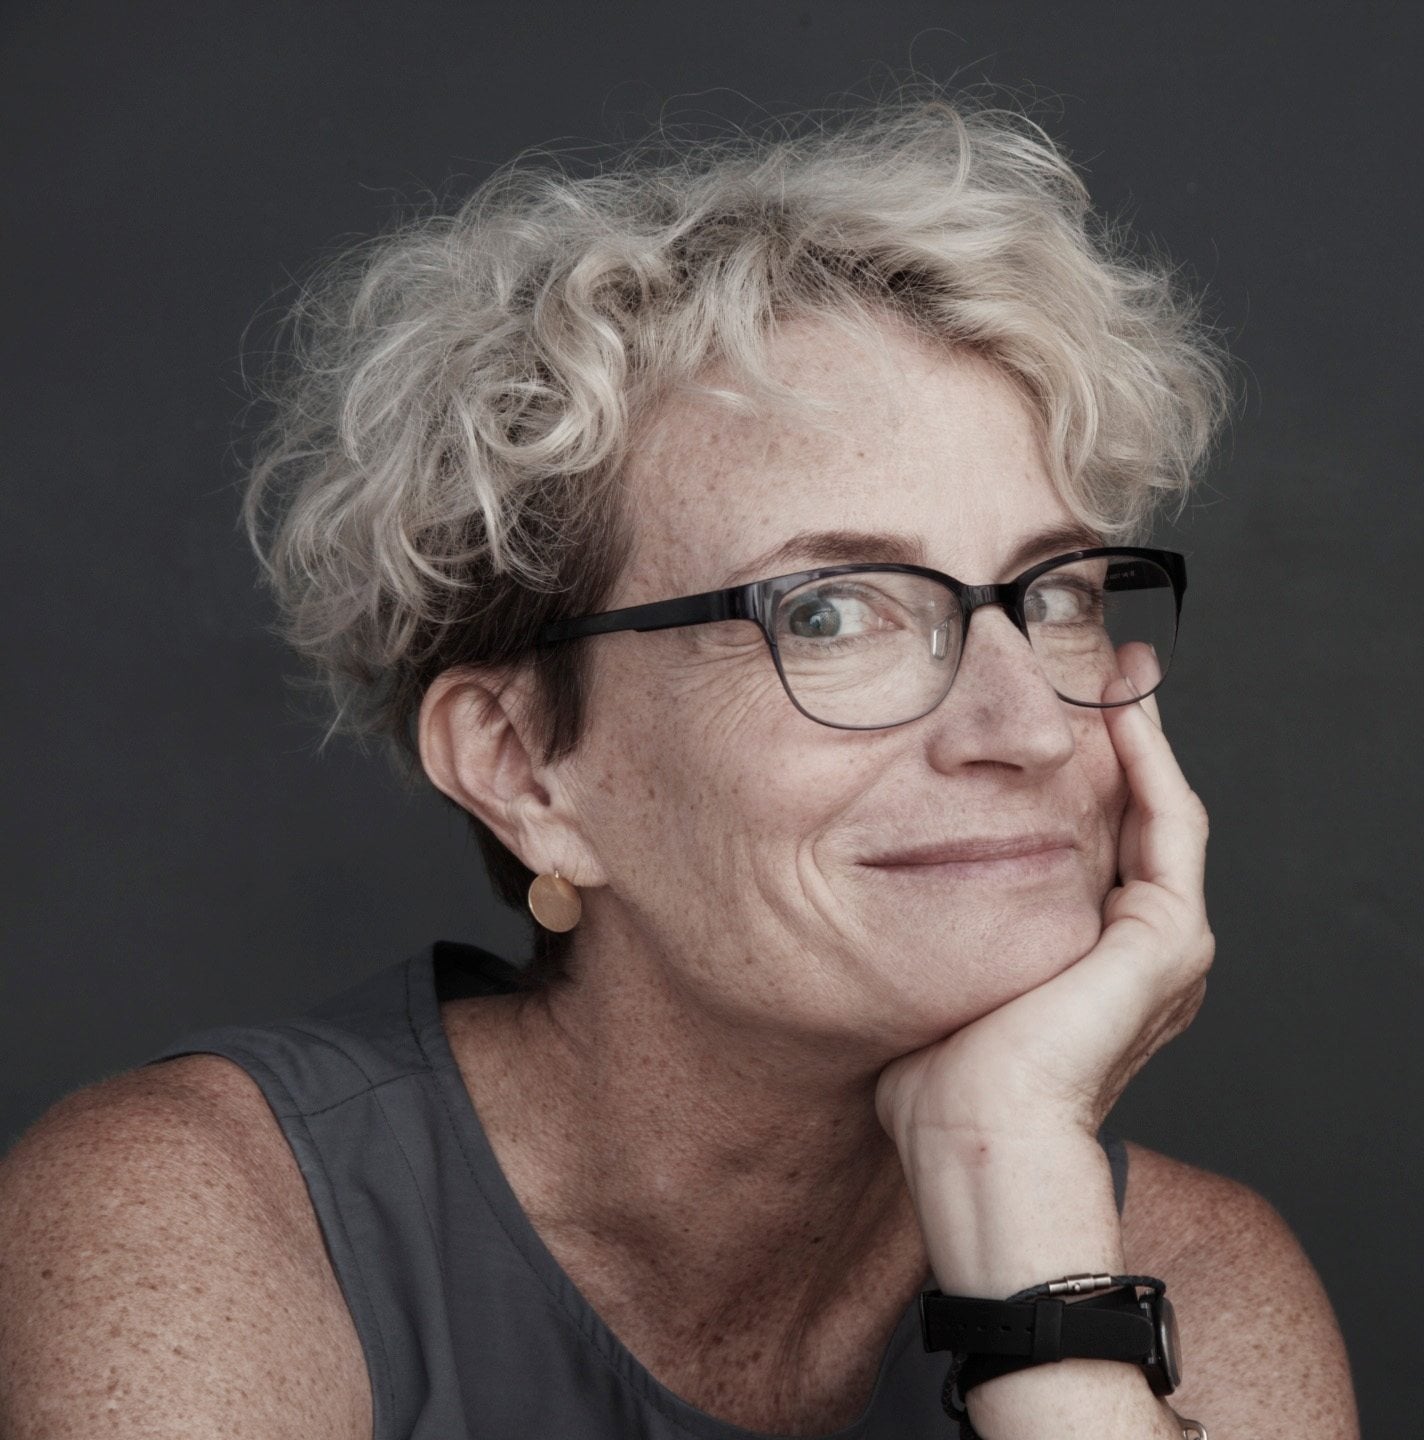 Ashton Applewhite, an anti-ageism blogger and author, says it&#039;s no longer cool to make fun of growing old.